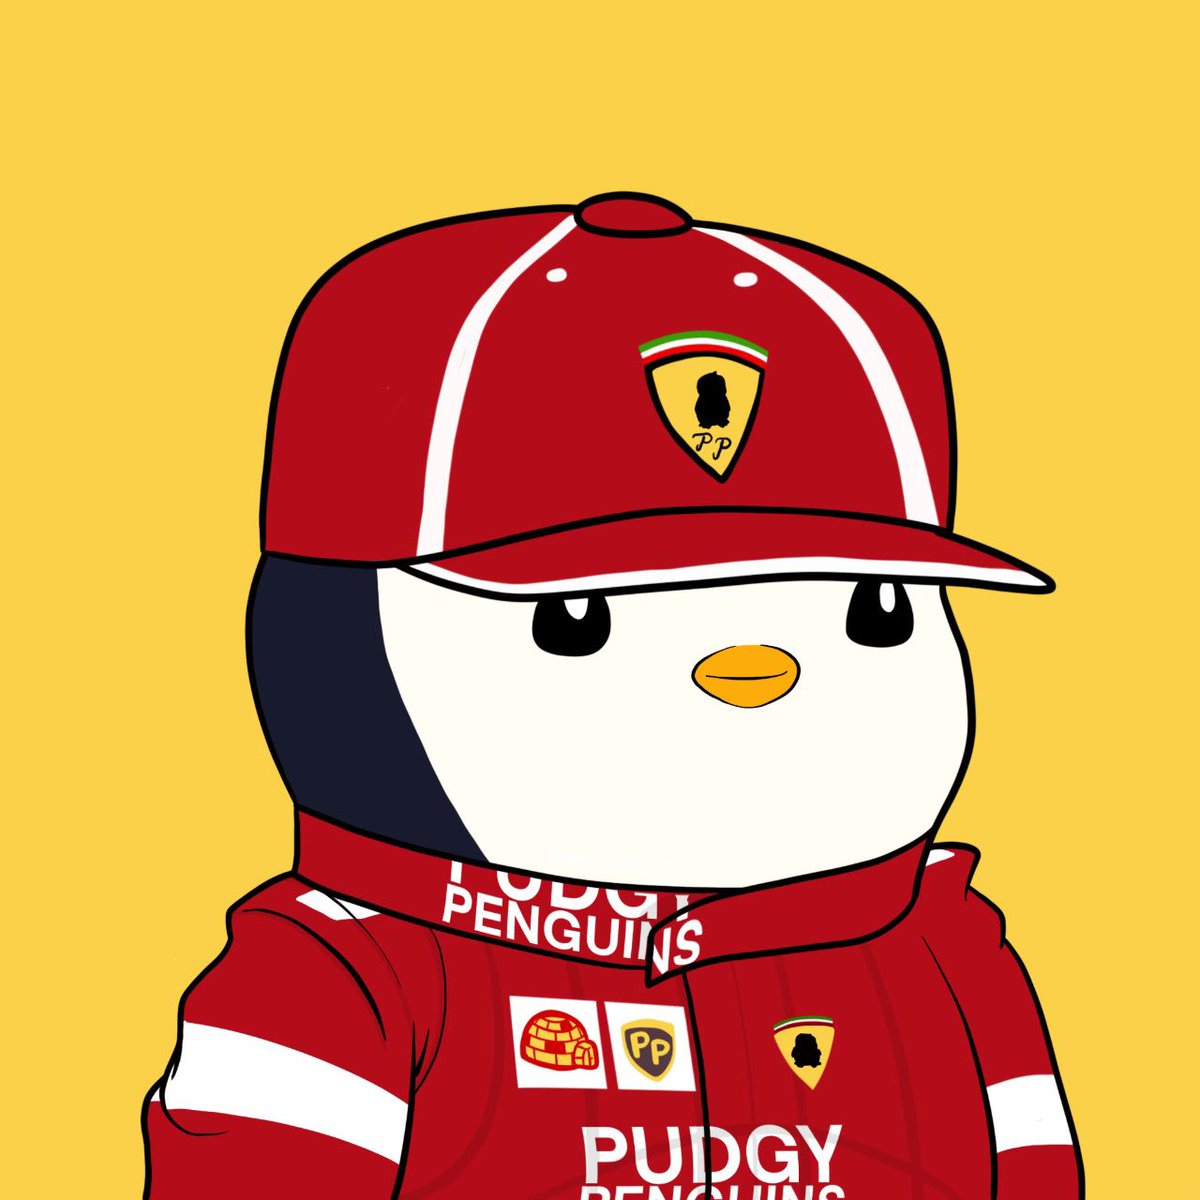 A cartoon penguin, in a yellow background, wearing red cap and jacket